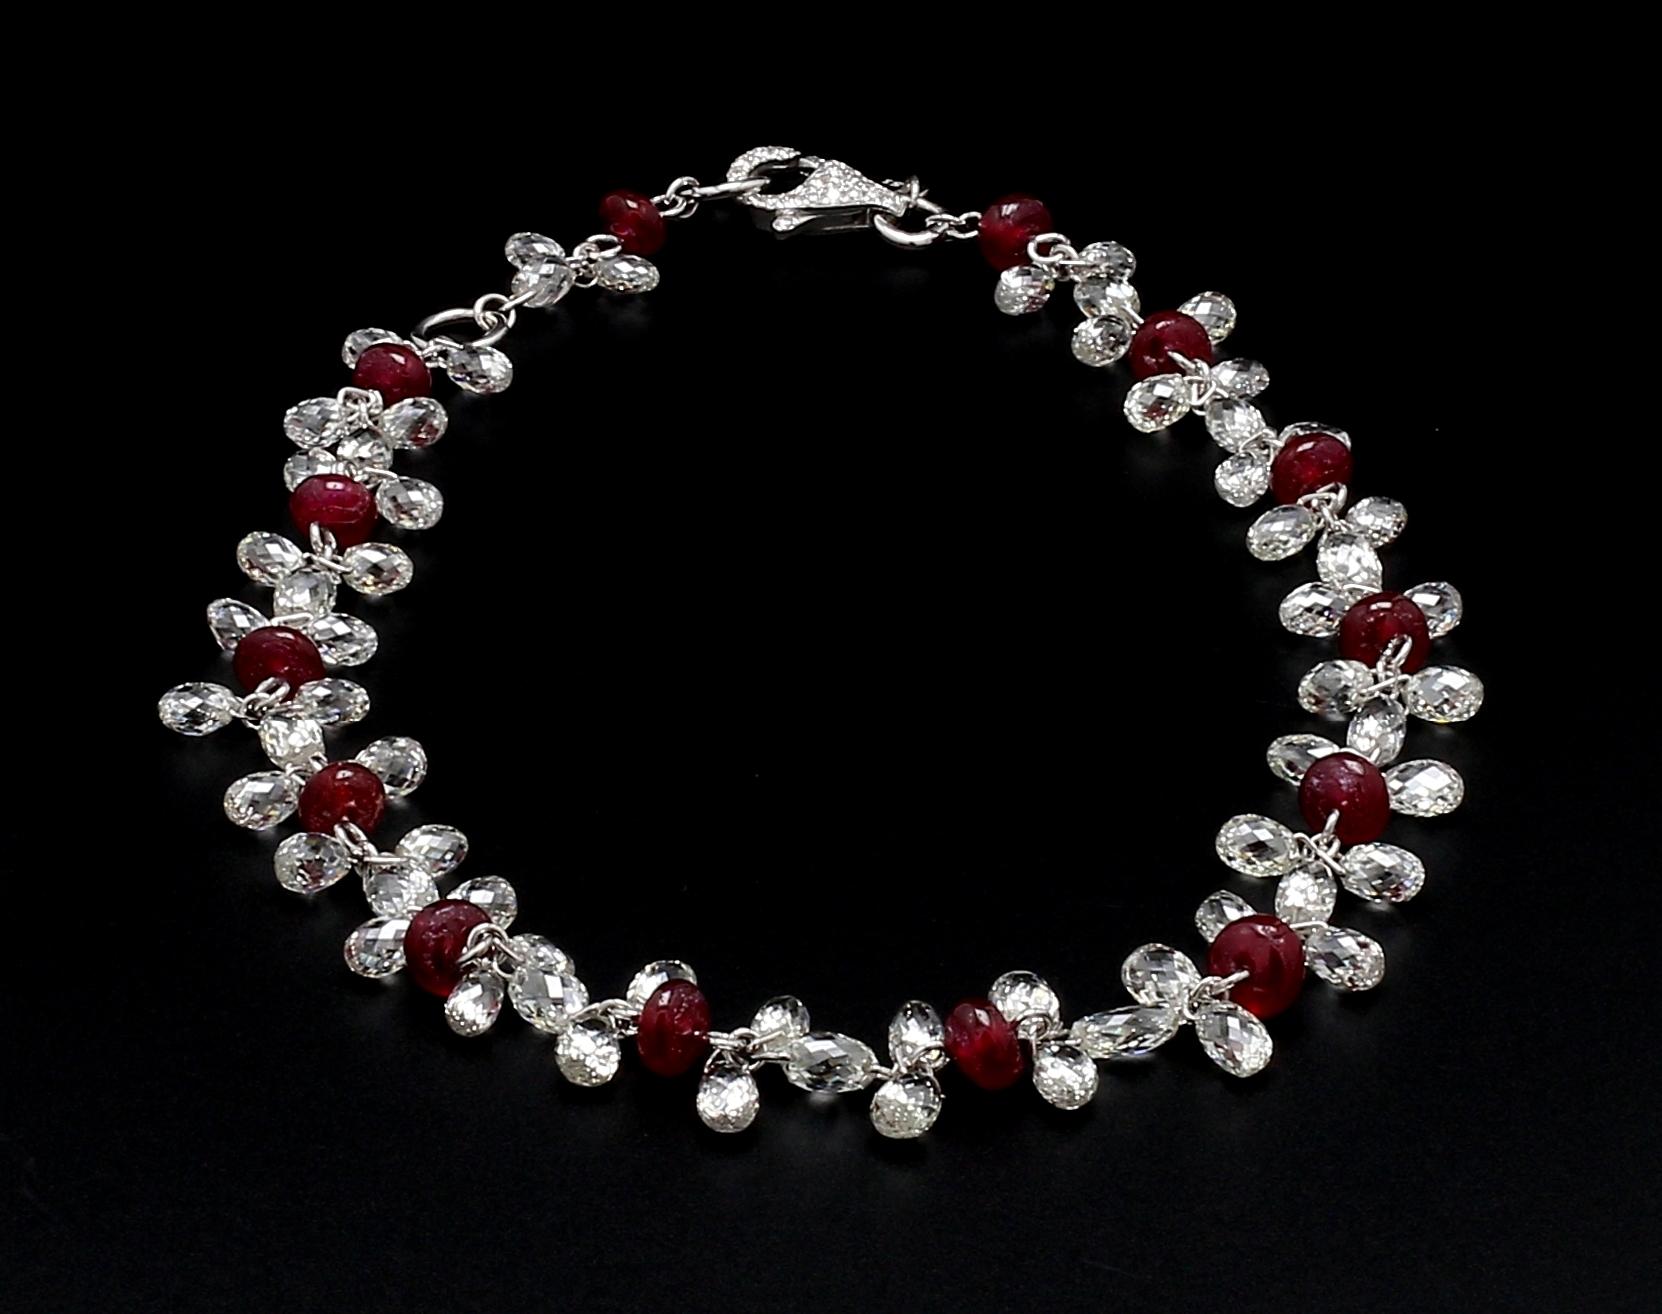 PANIM Diamond Briolette & Ruby 18K White Gold Dangling Bracelet

Bracelets are worn to enhance the look. Women love to look good. Women often wear exquisite gold bracelets on their wrists, and this is quite usual. Every woman should own a diamond